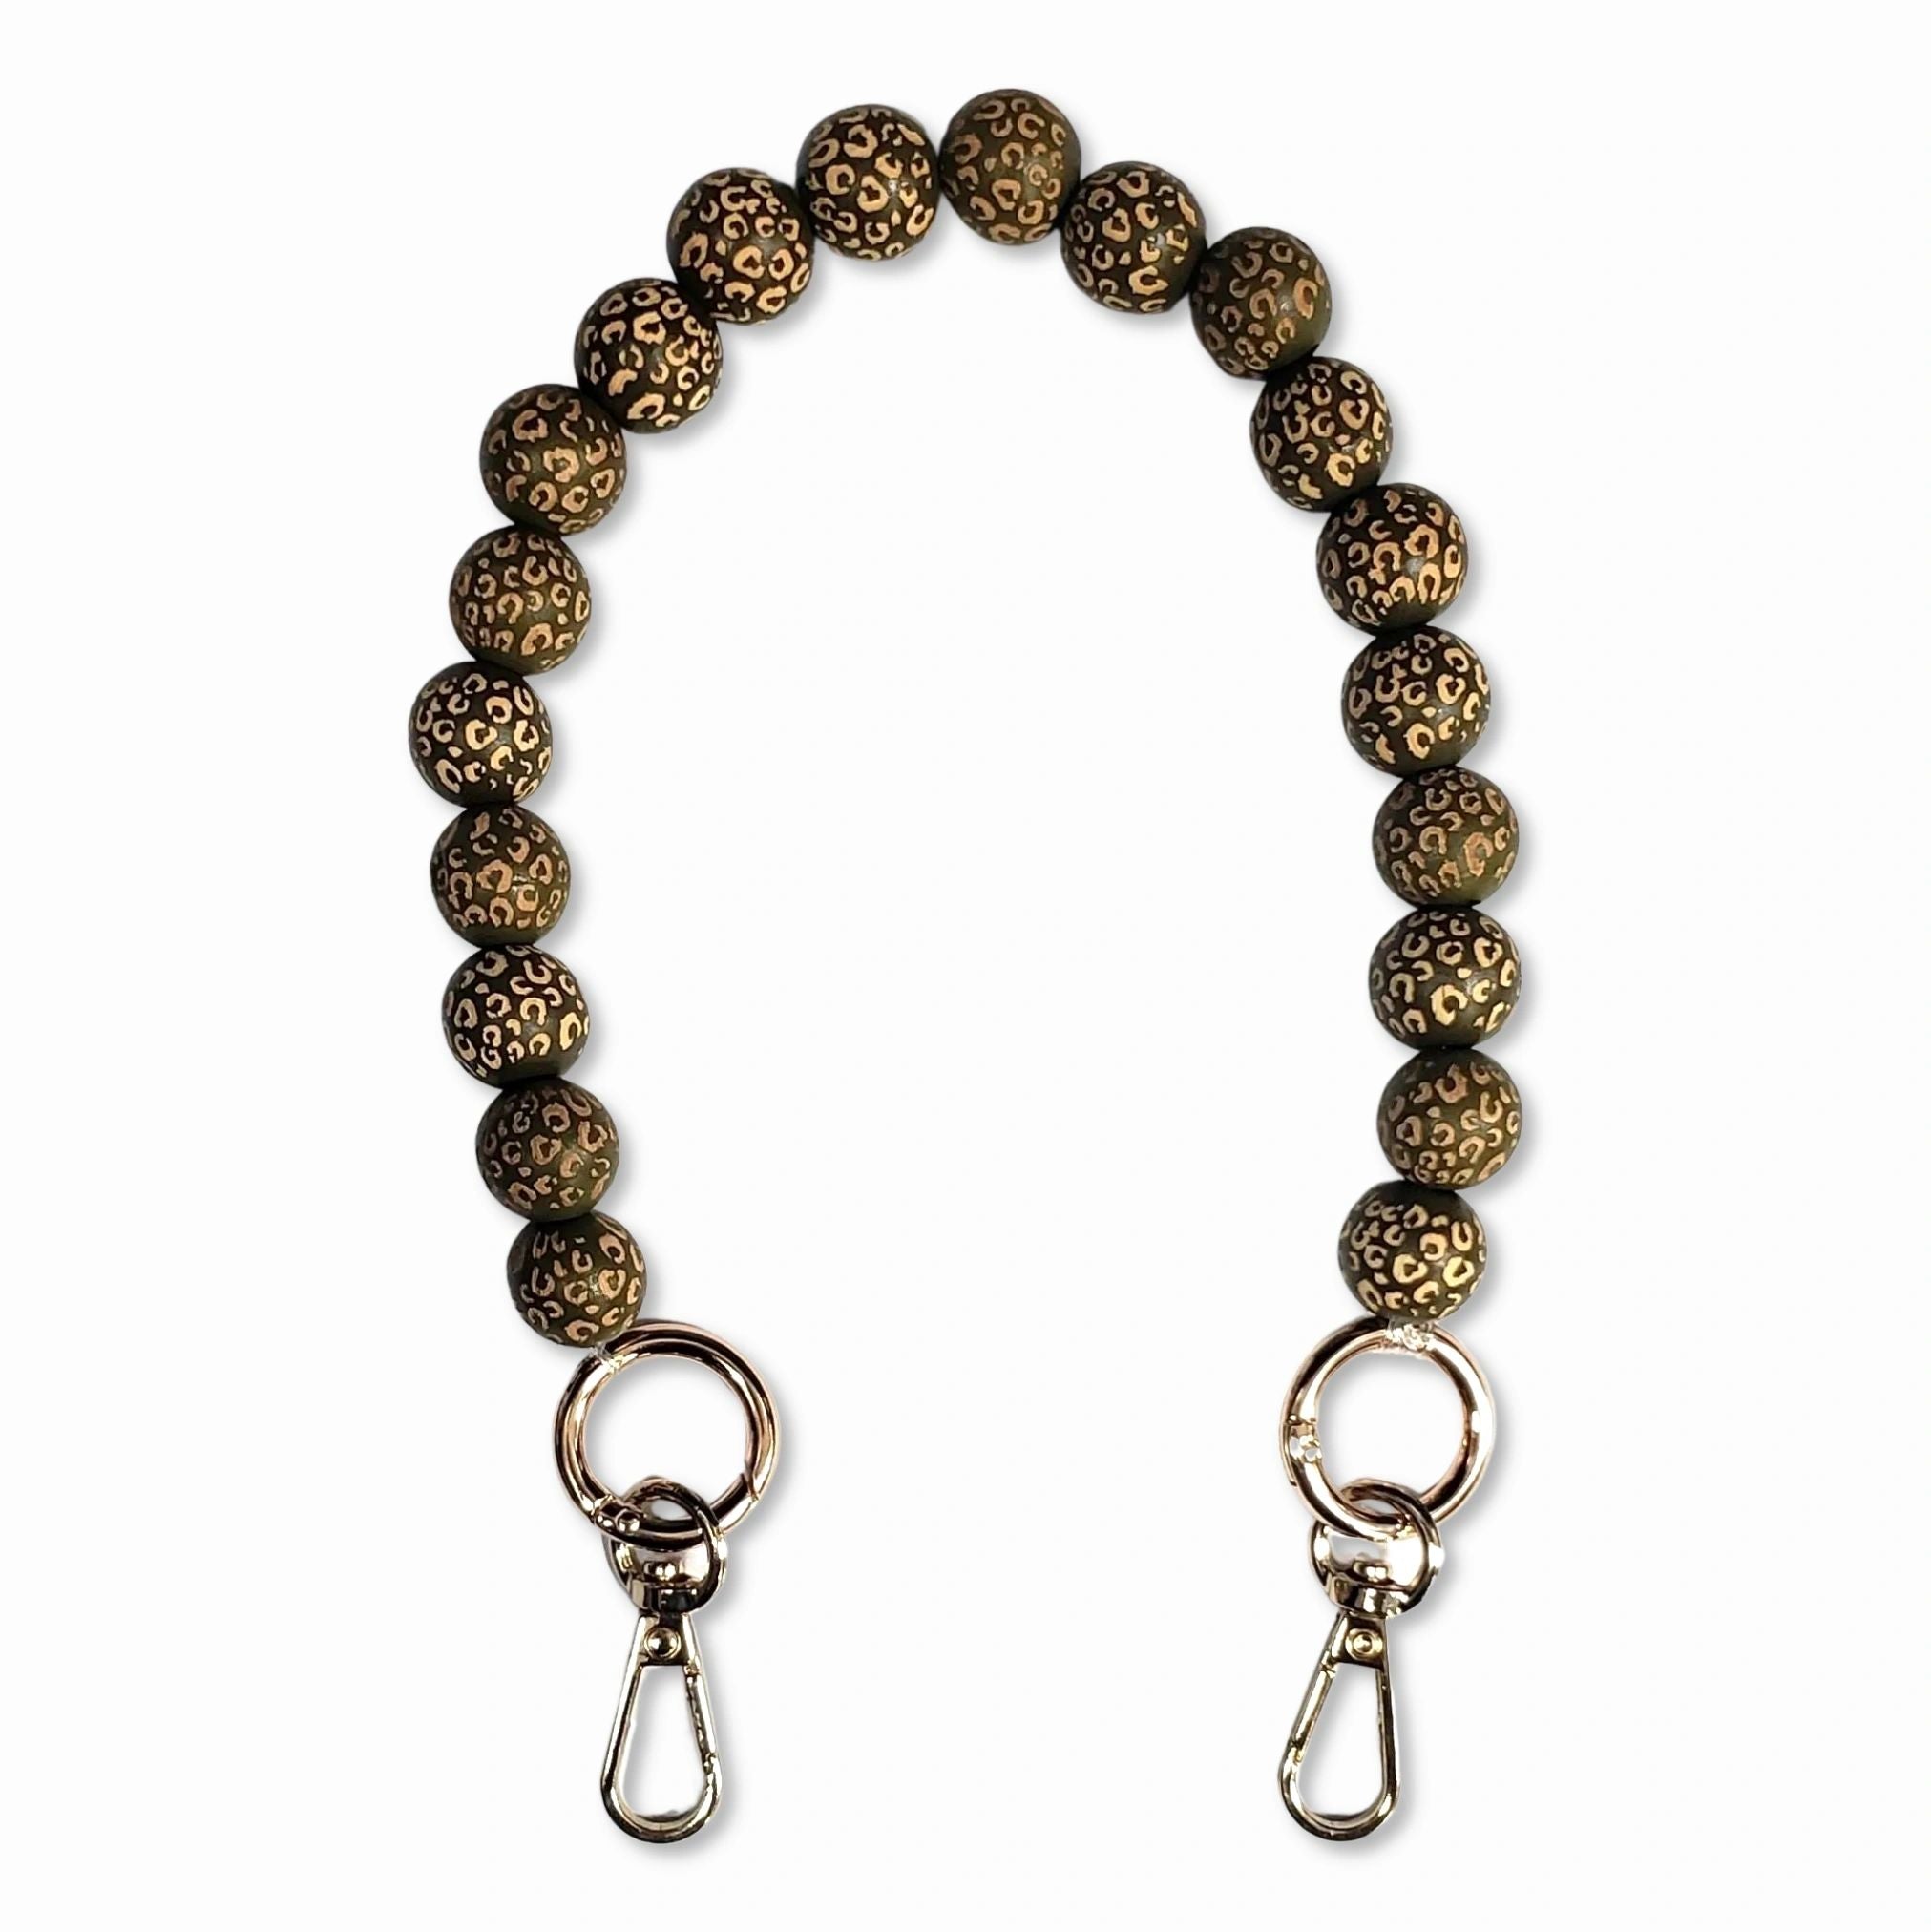 khaki leopard Wooden Bead Short Phone Chain with Silver Carabiners